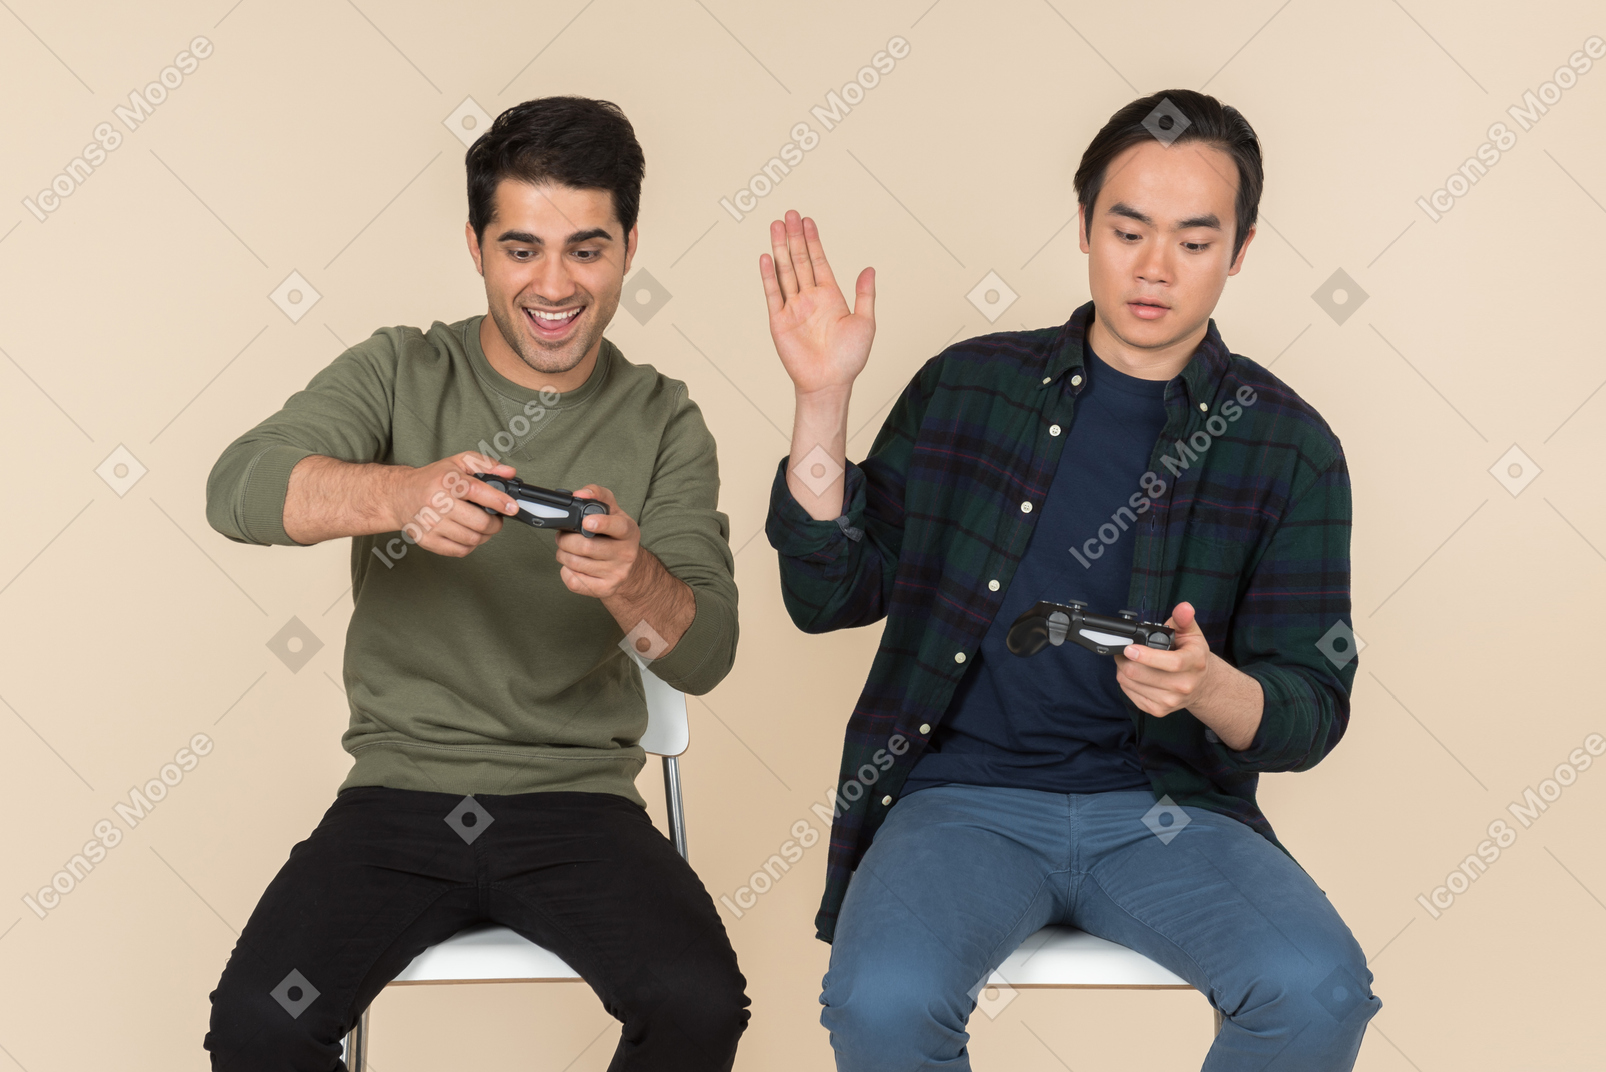 Interracial friends sitting in chairs and playing video game